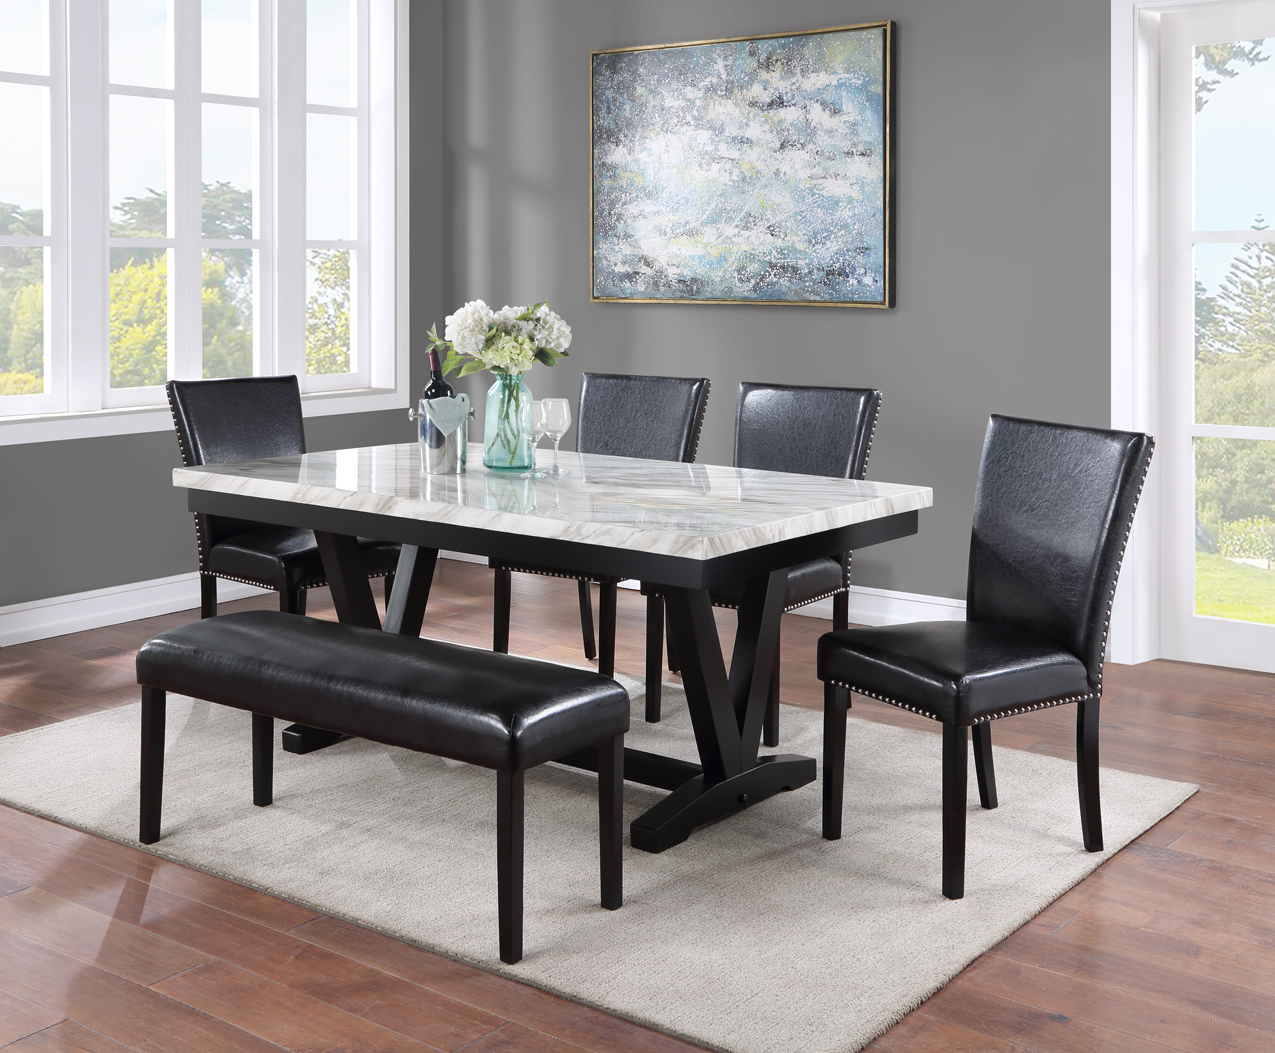 2222 TANNER DINING FAUX CARRARA MBL 7PC SET with 6 chairs